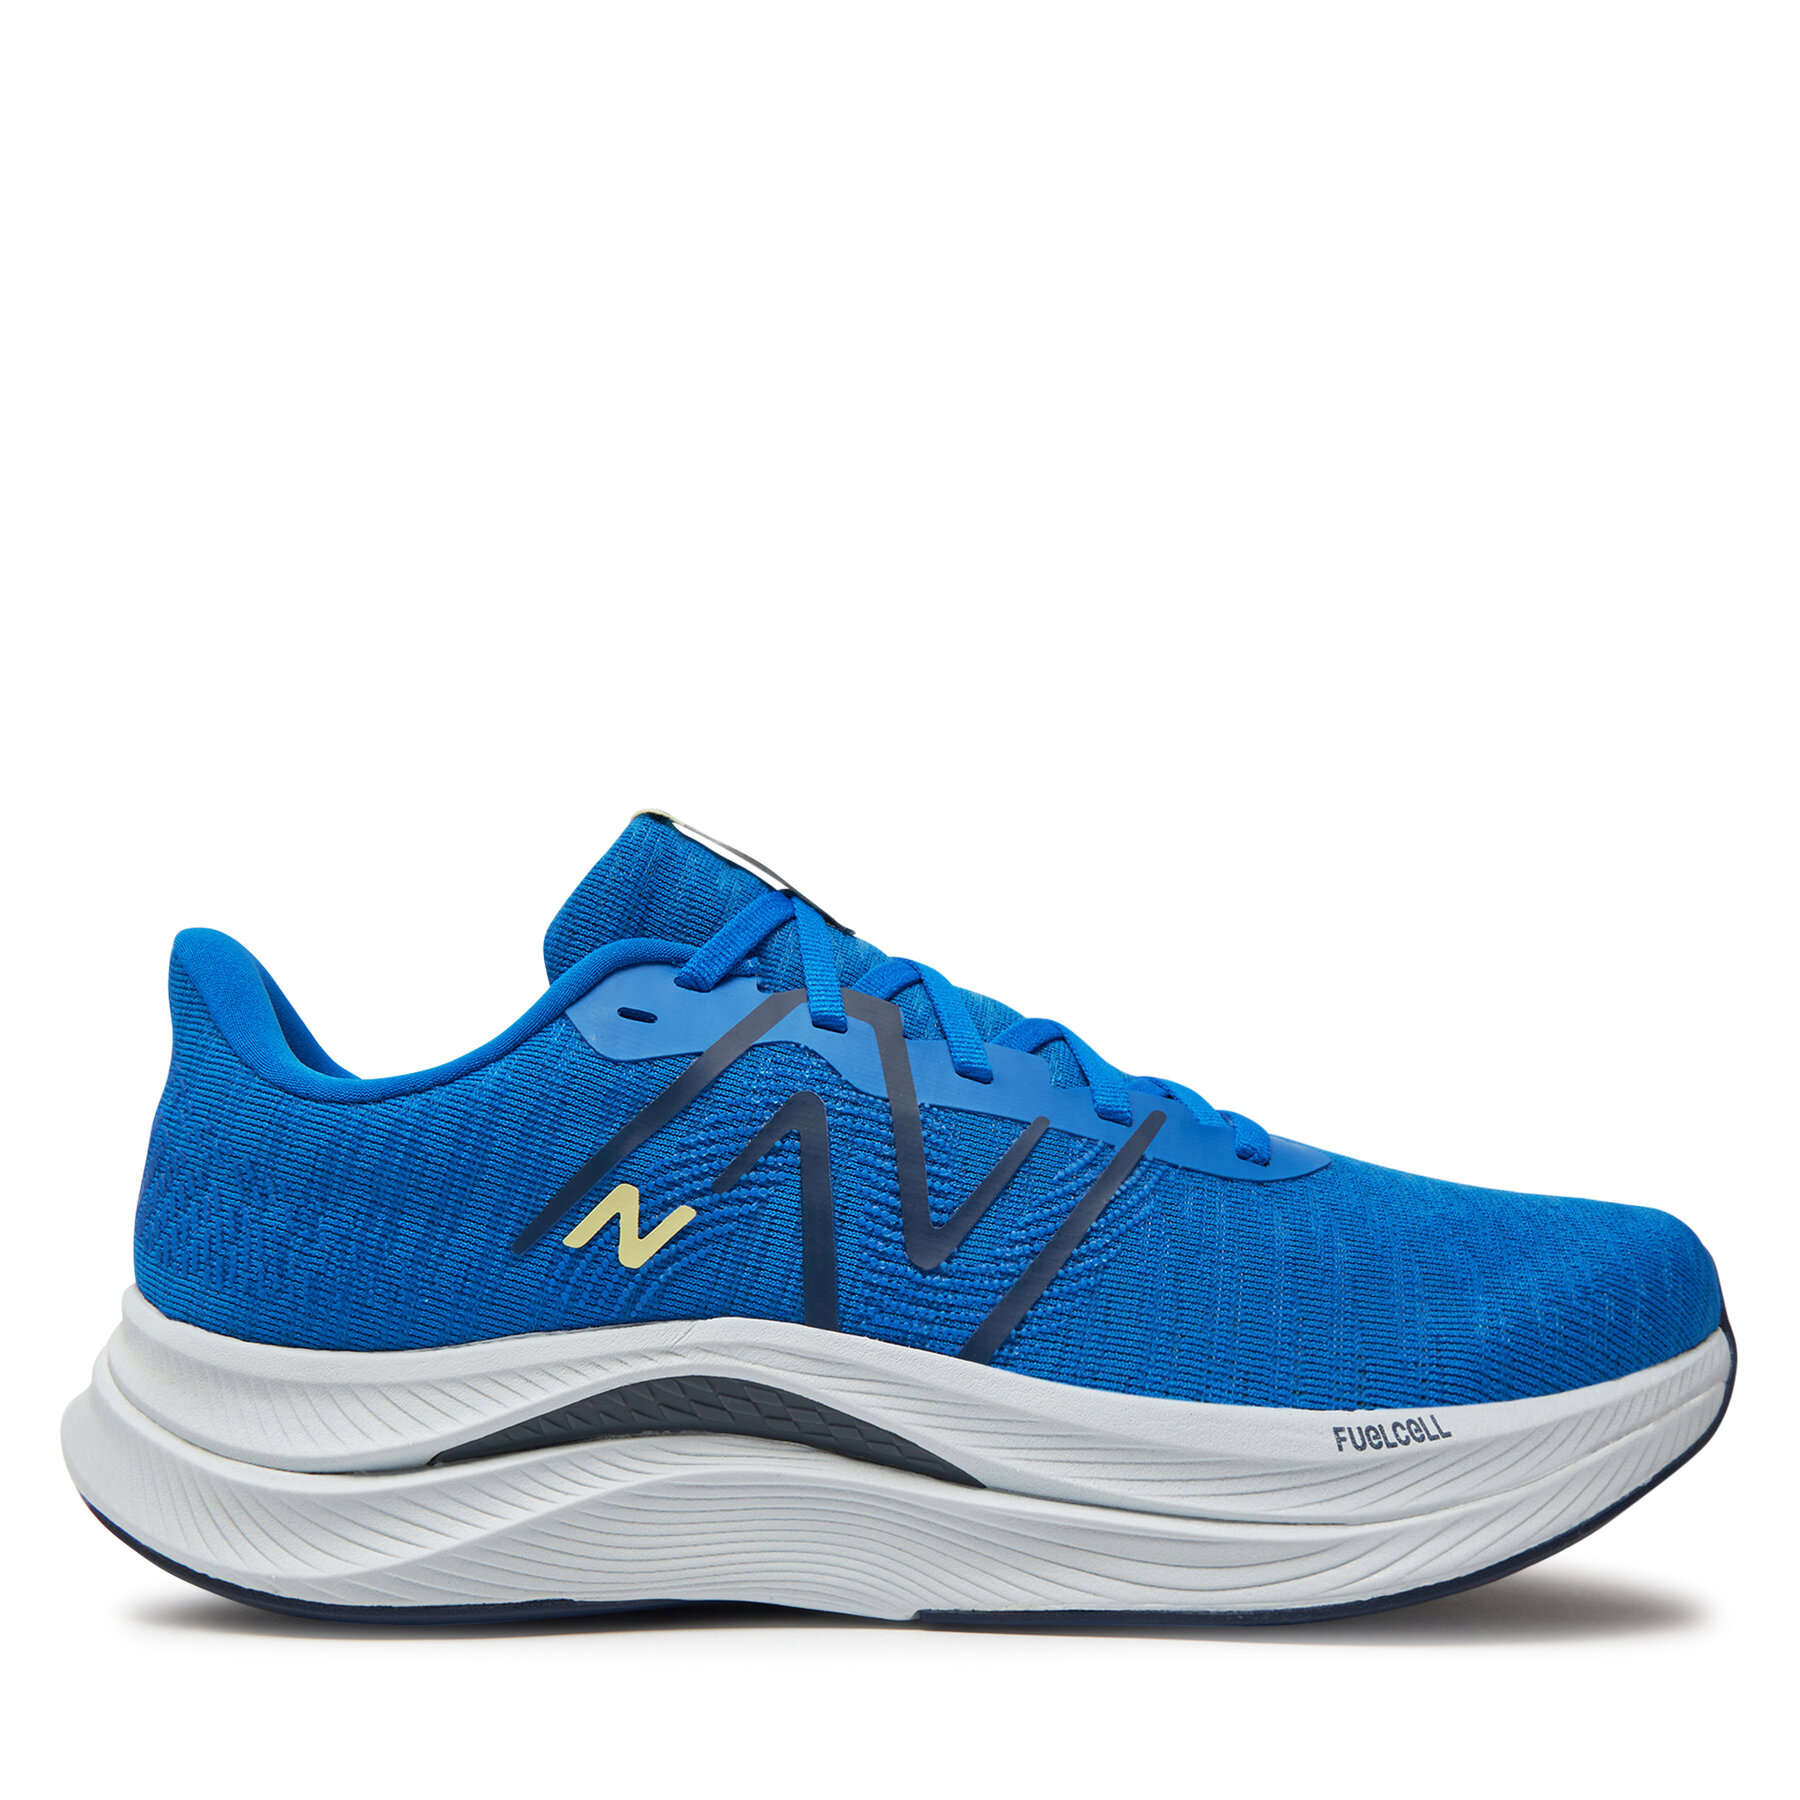 NEW BALANCE FUELCELL PROPEL V4 - Zapatos